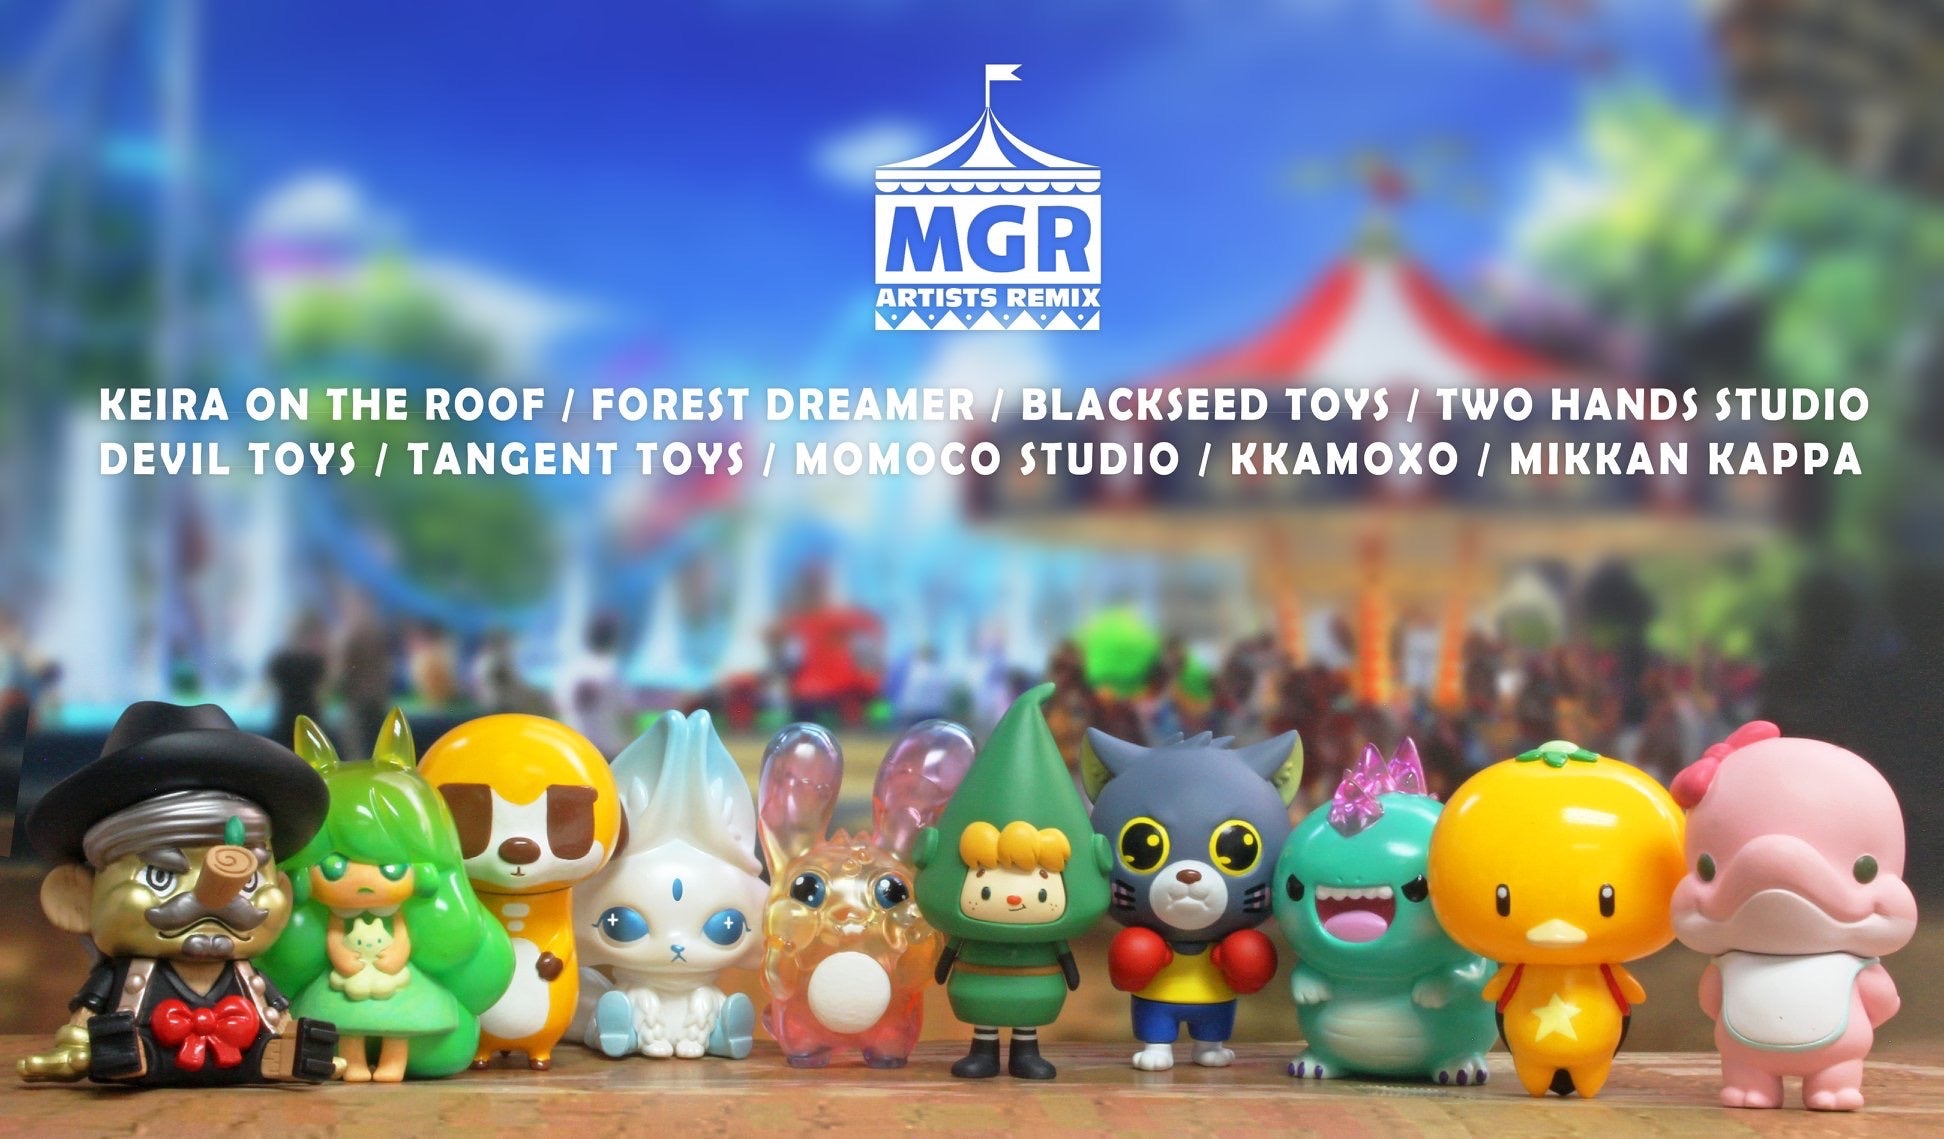 MGR Artist Remix Blindbox Series: A group of small toys by various designers, including Blackseed Toys and Devil Toys, made of PVC material.